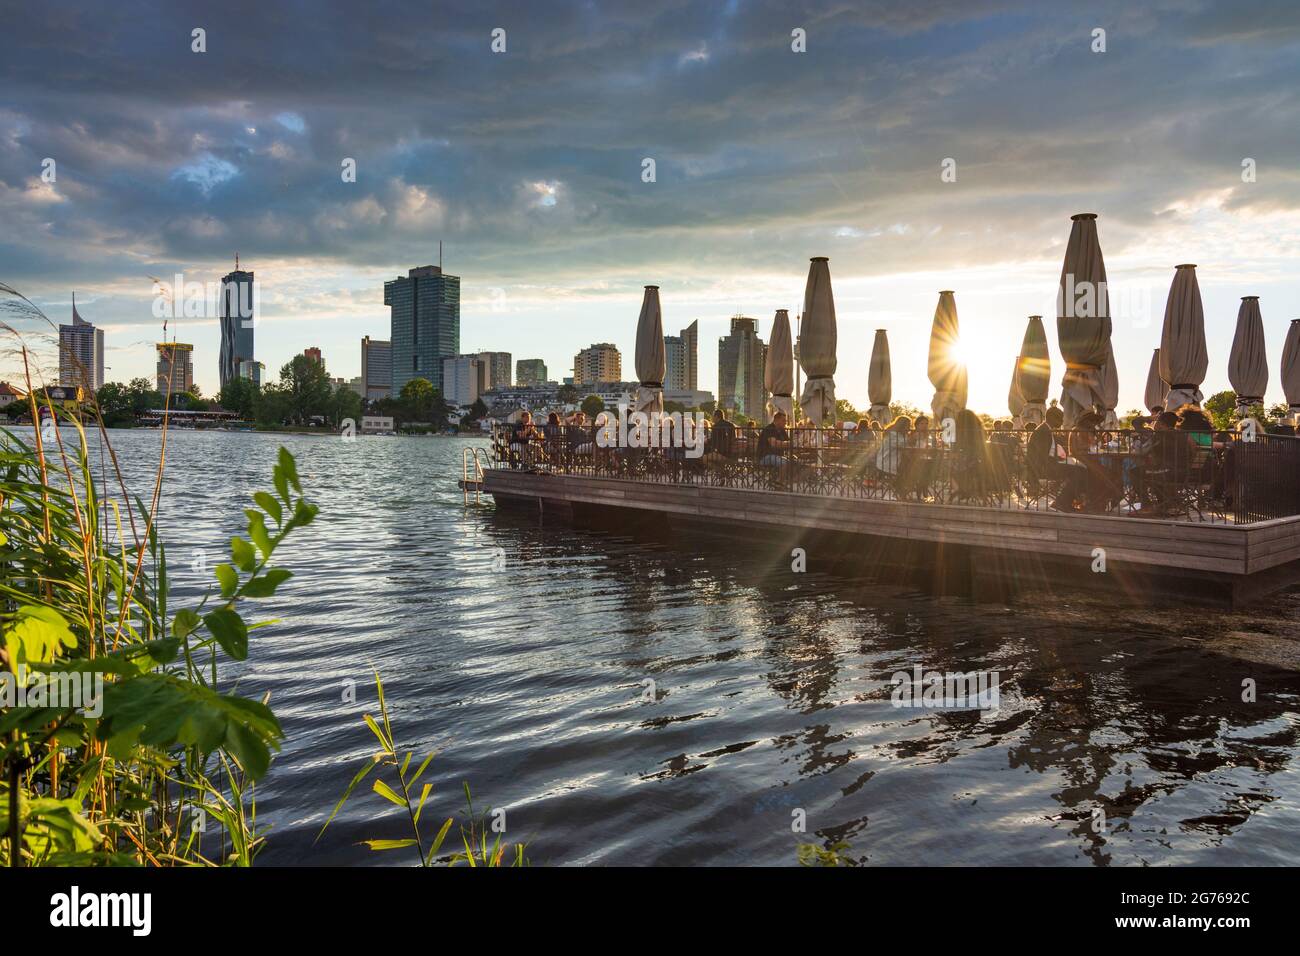 Wien, Vienna: late sun at river Alte Donau (Old Danube), floating platform of restaurant Strandcafe, boats, tower Donauturm, highrises of Donaucity, D Stock Photo